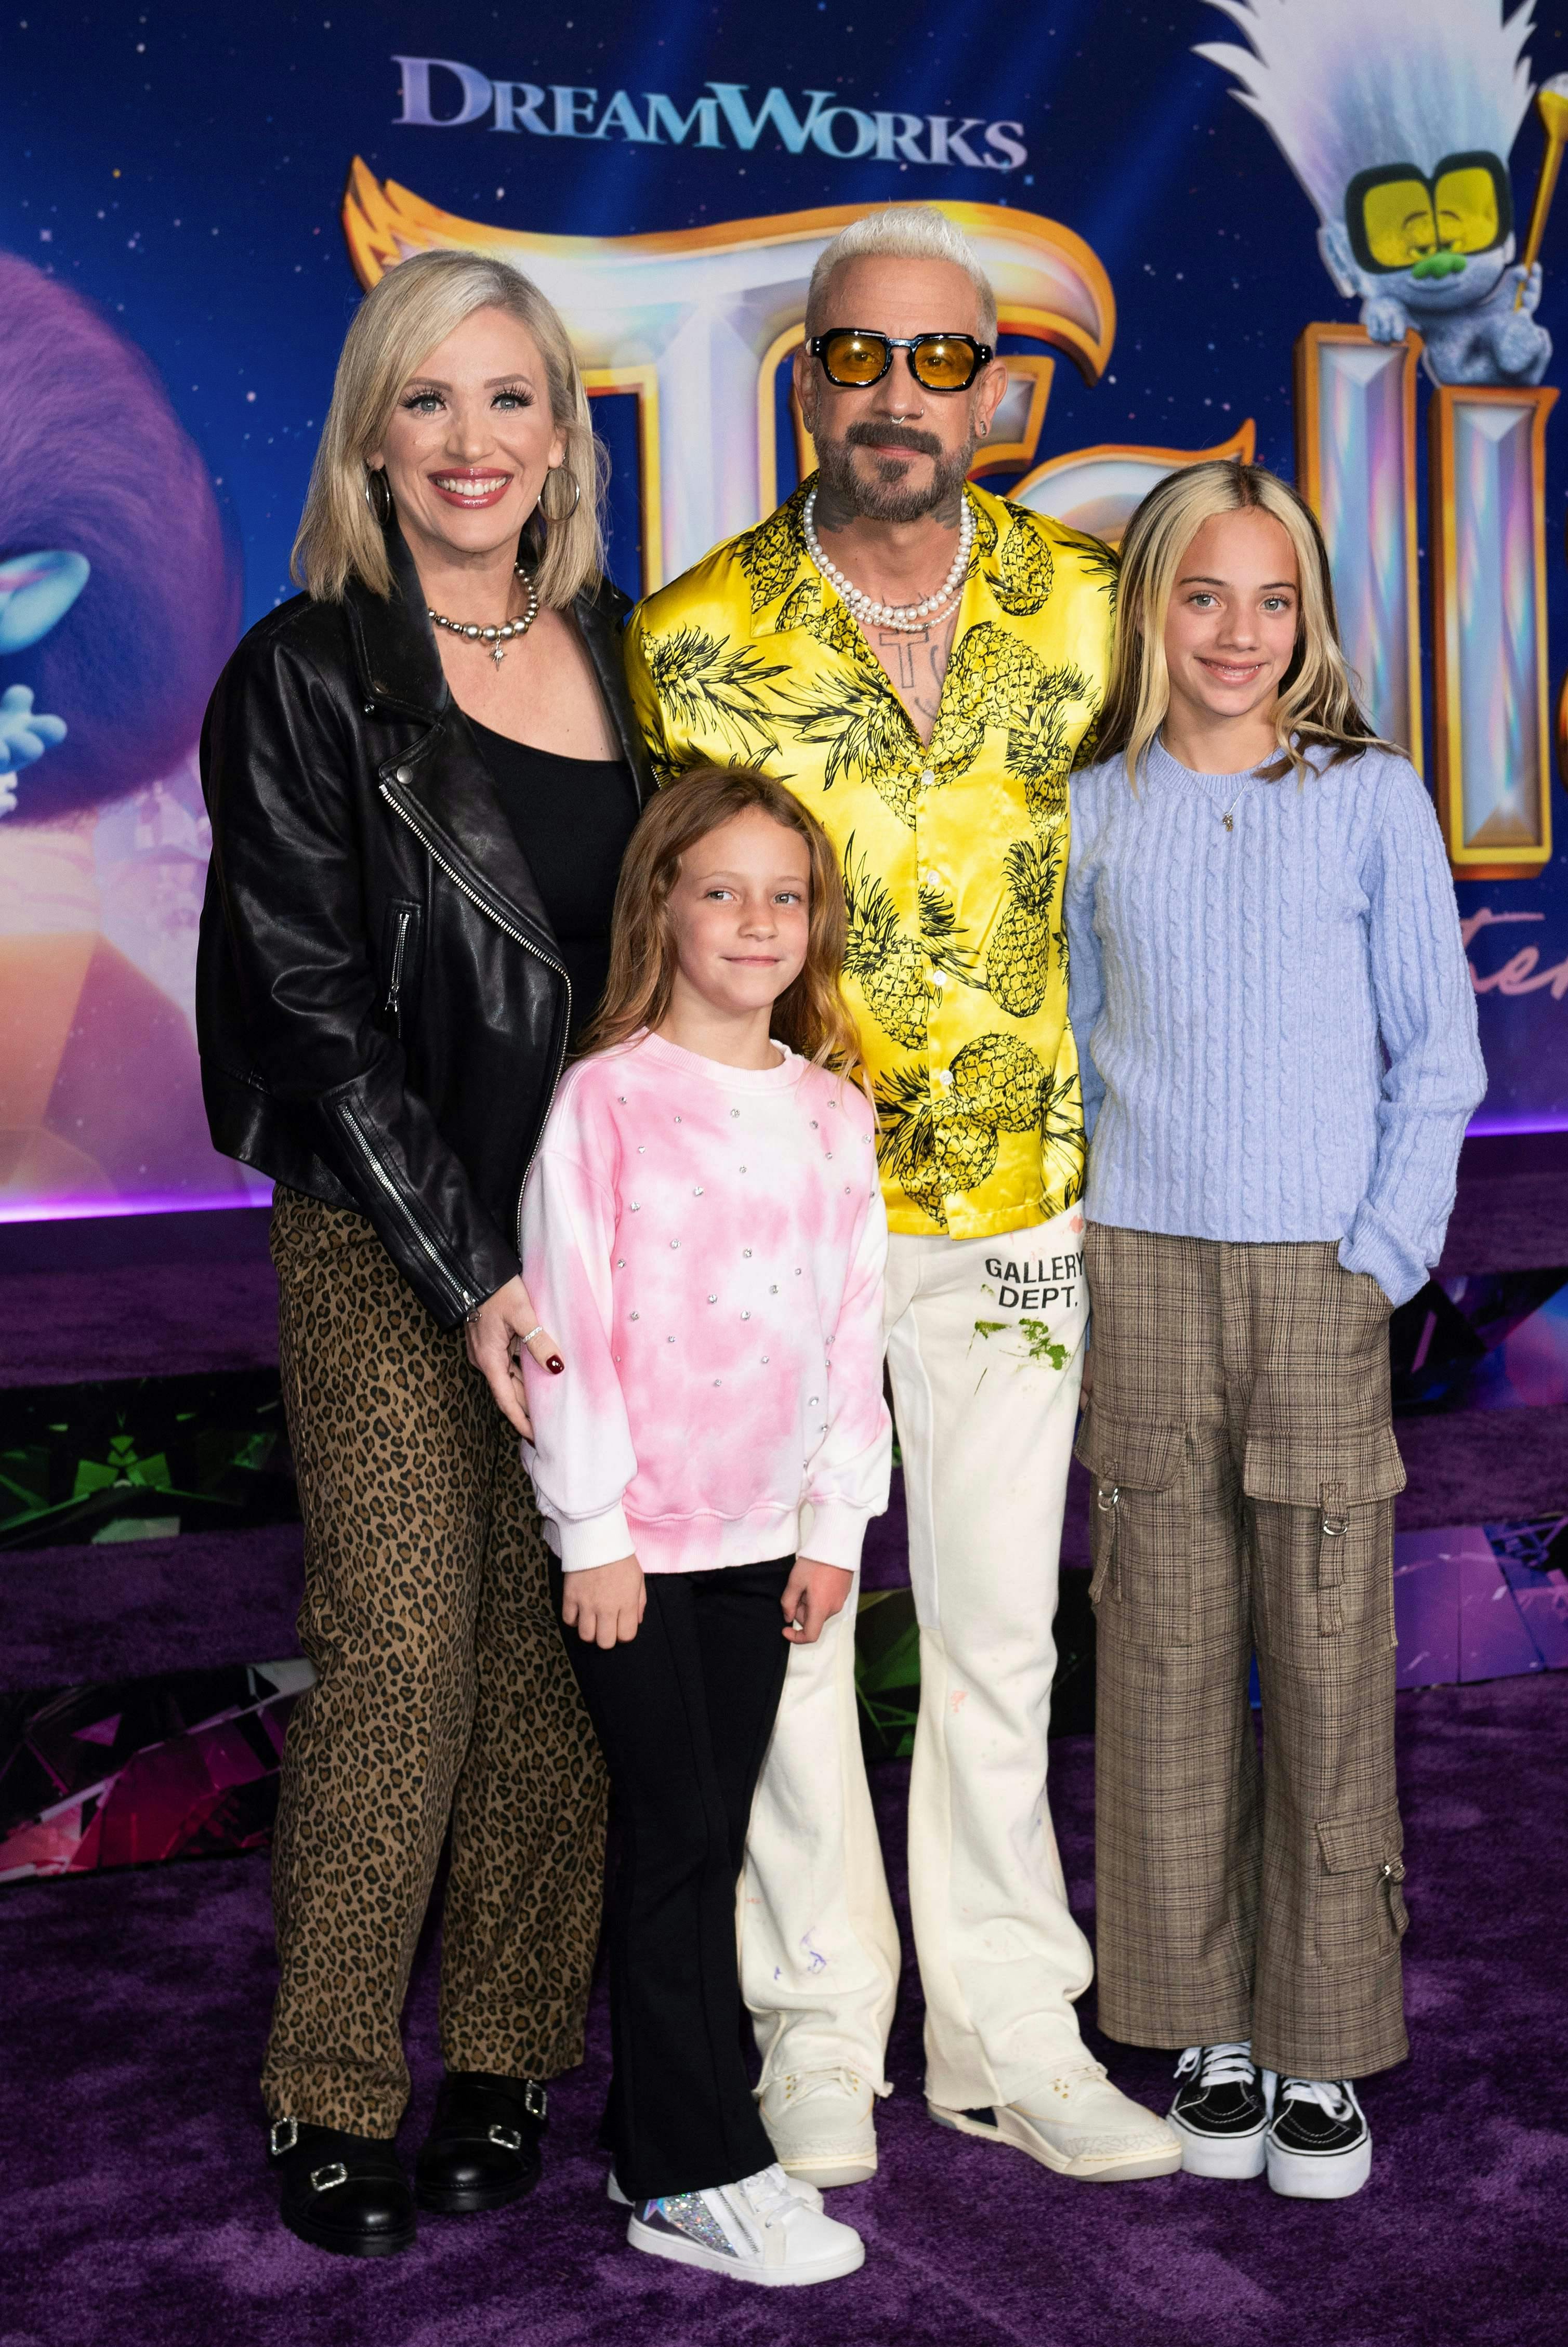 US singer AJ McLean and family arrive for the premiere of "Trolls: Band Together" at the TCL Chinese Theater in Hollywood, California, on November 15, 2023. (Photo by VALERIE MACON / AFP)